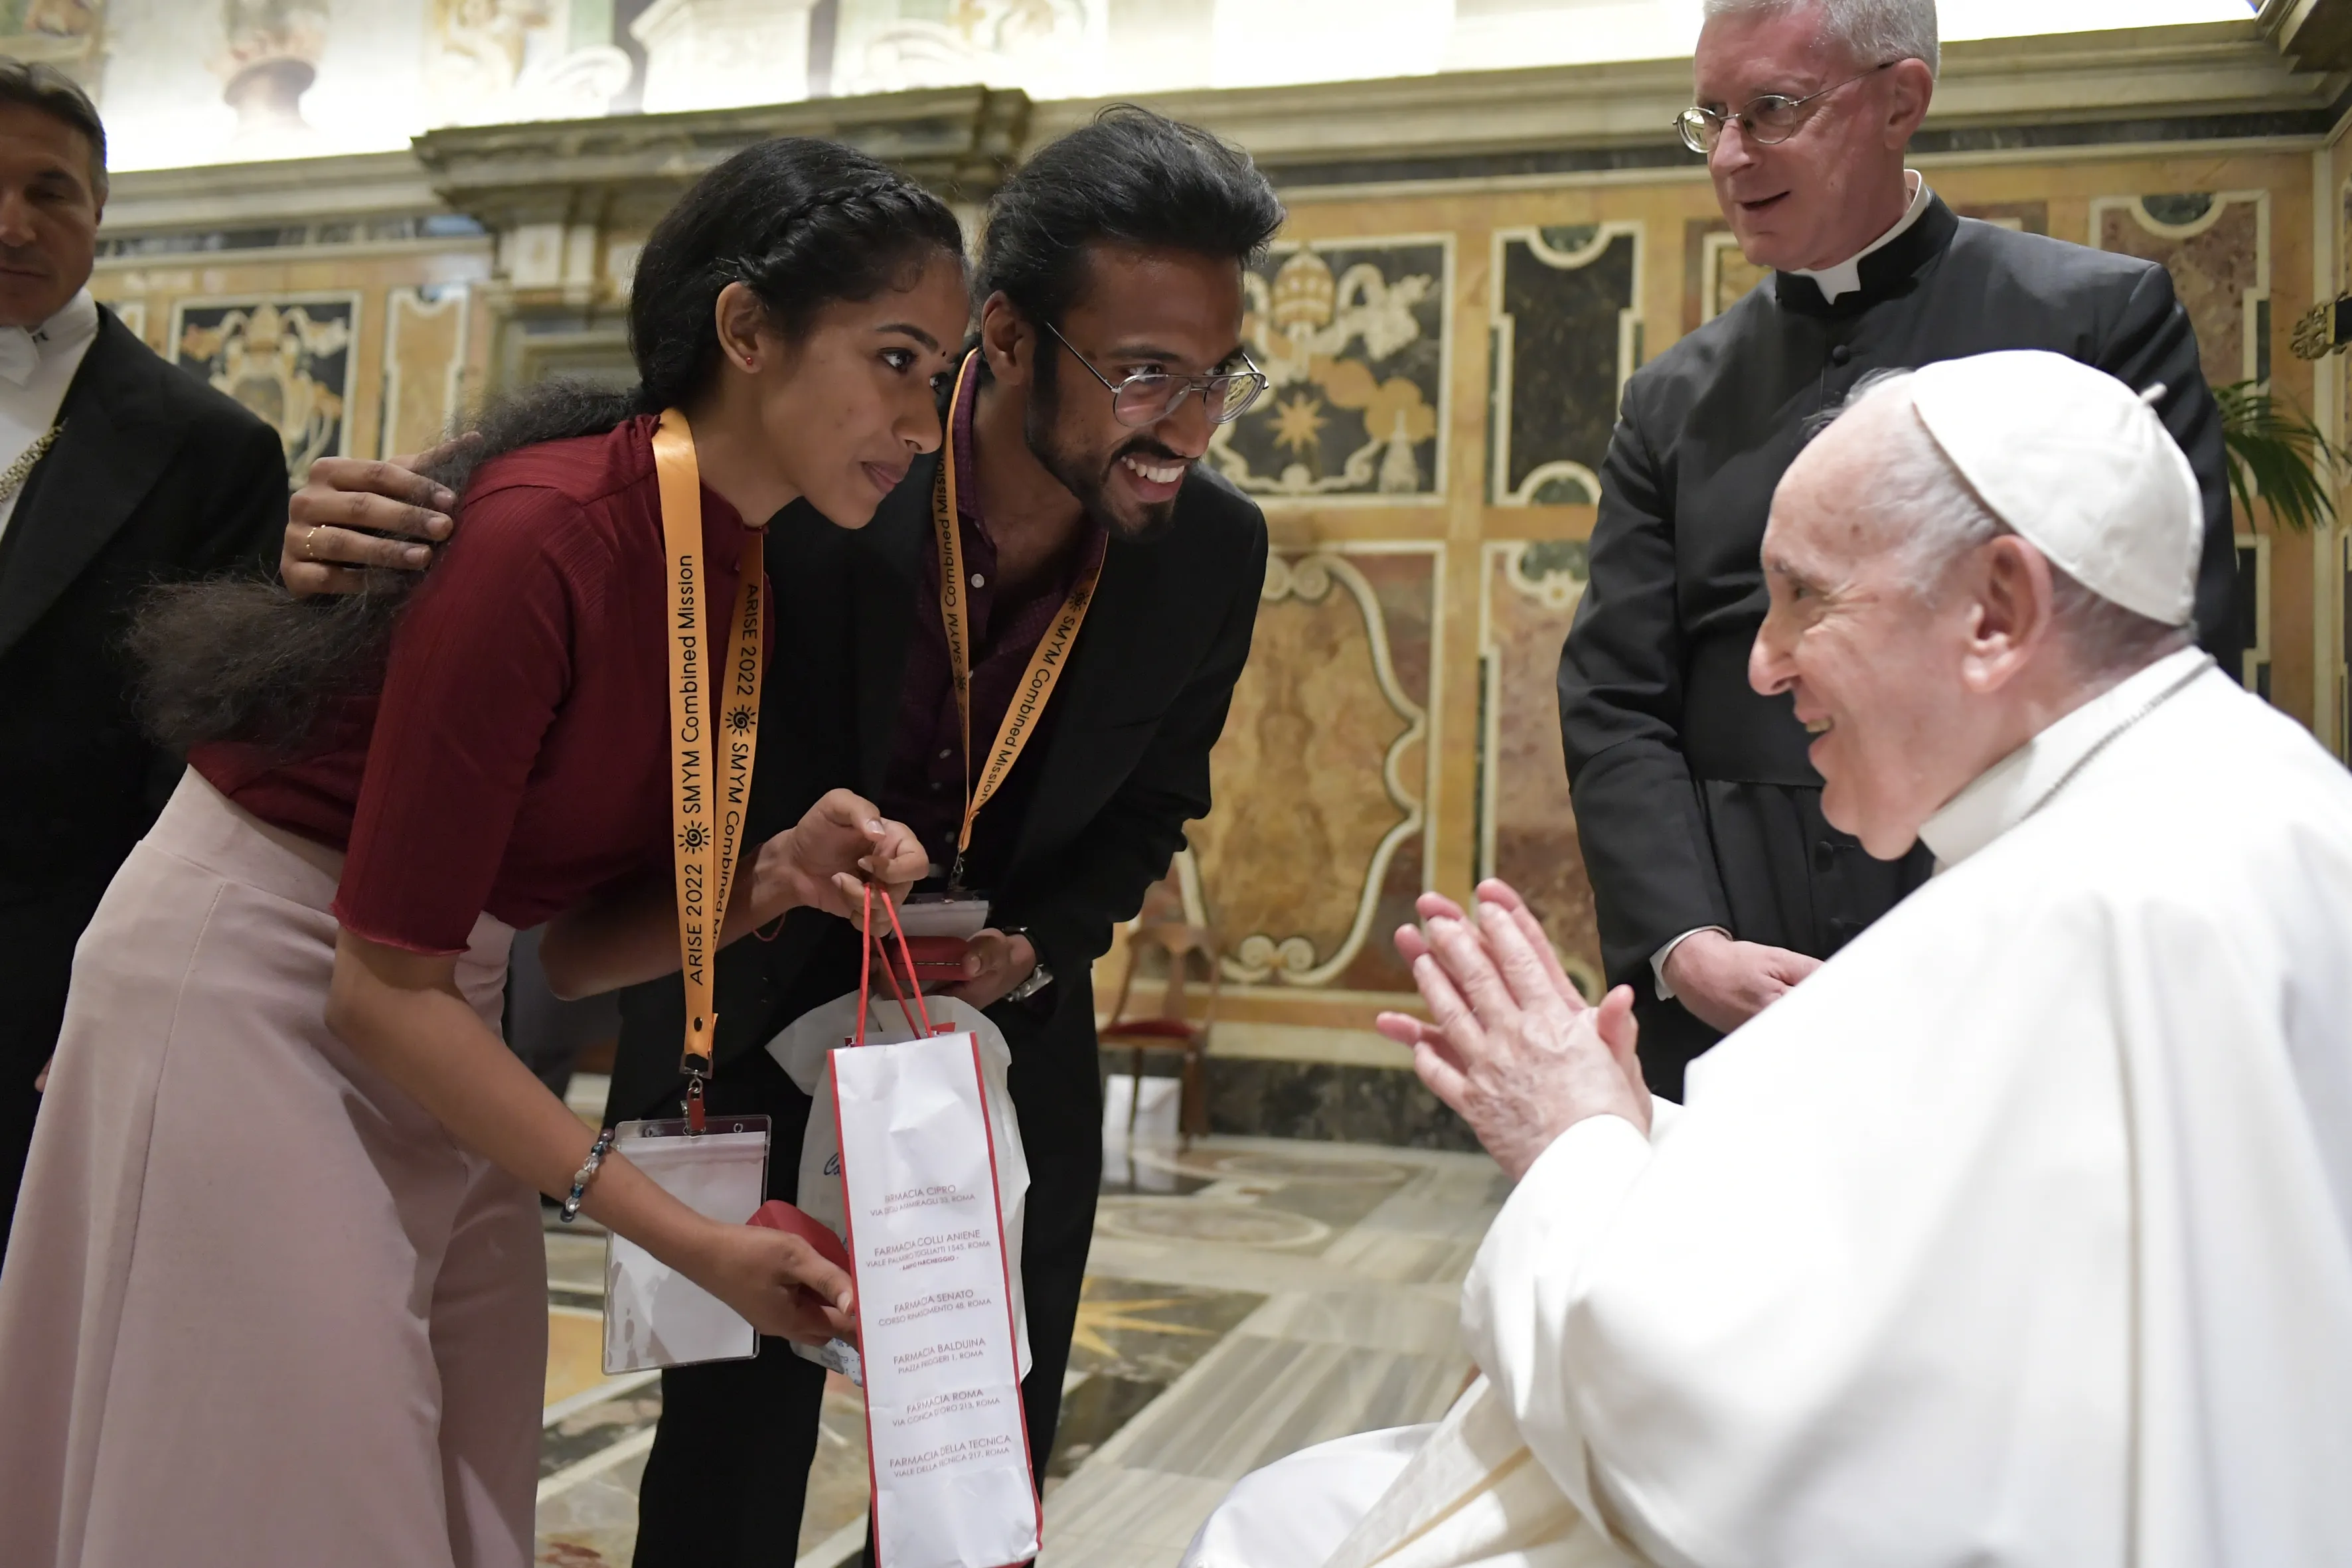 Pope Francis met with participants in the Syro-Malabar Youth Leaders Conference on June 18, 2022.?w=200&h=150